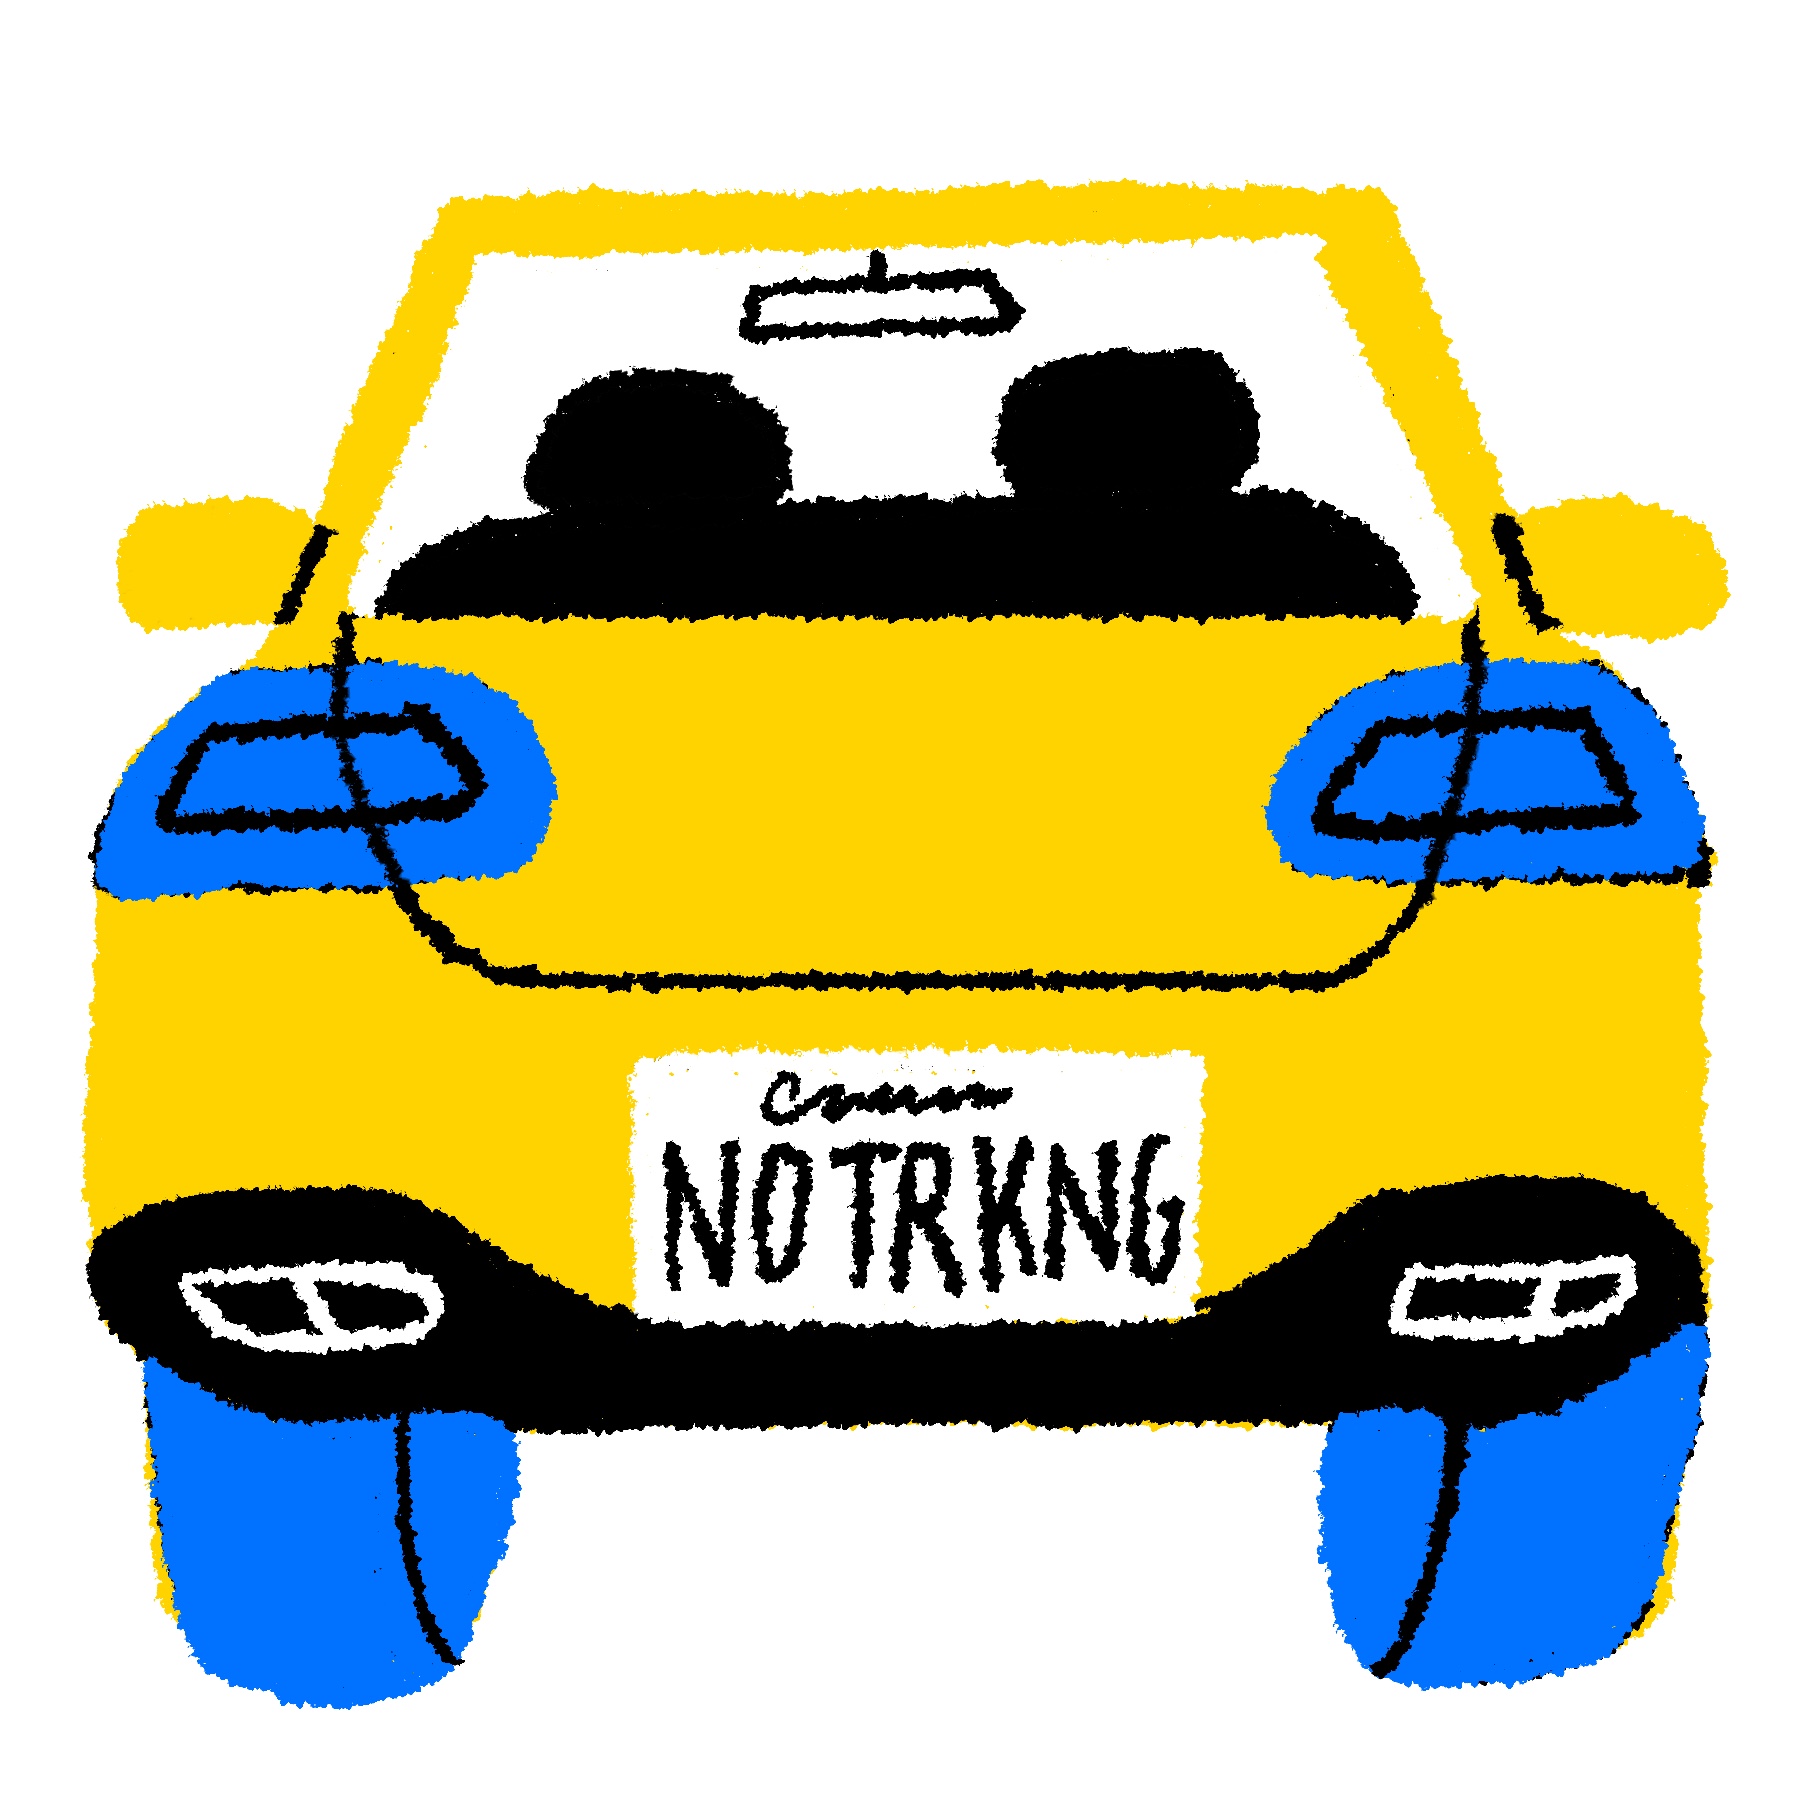 Spot illustration of the back of a car, with a license plate that reads “NOTRKING”.